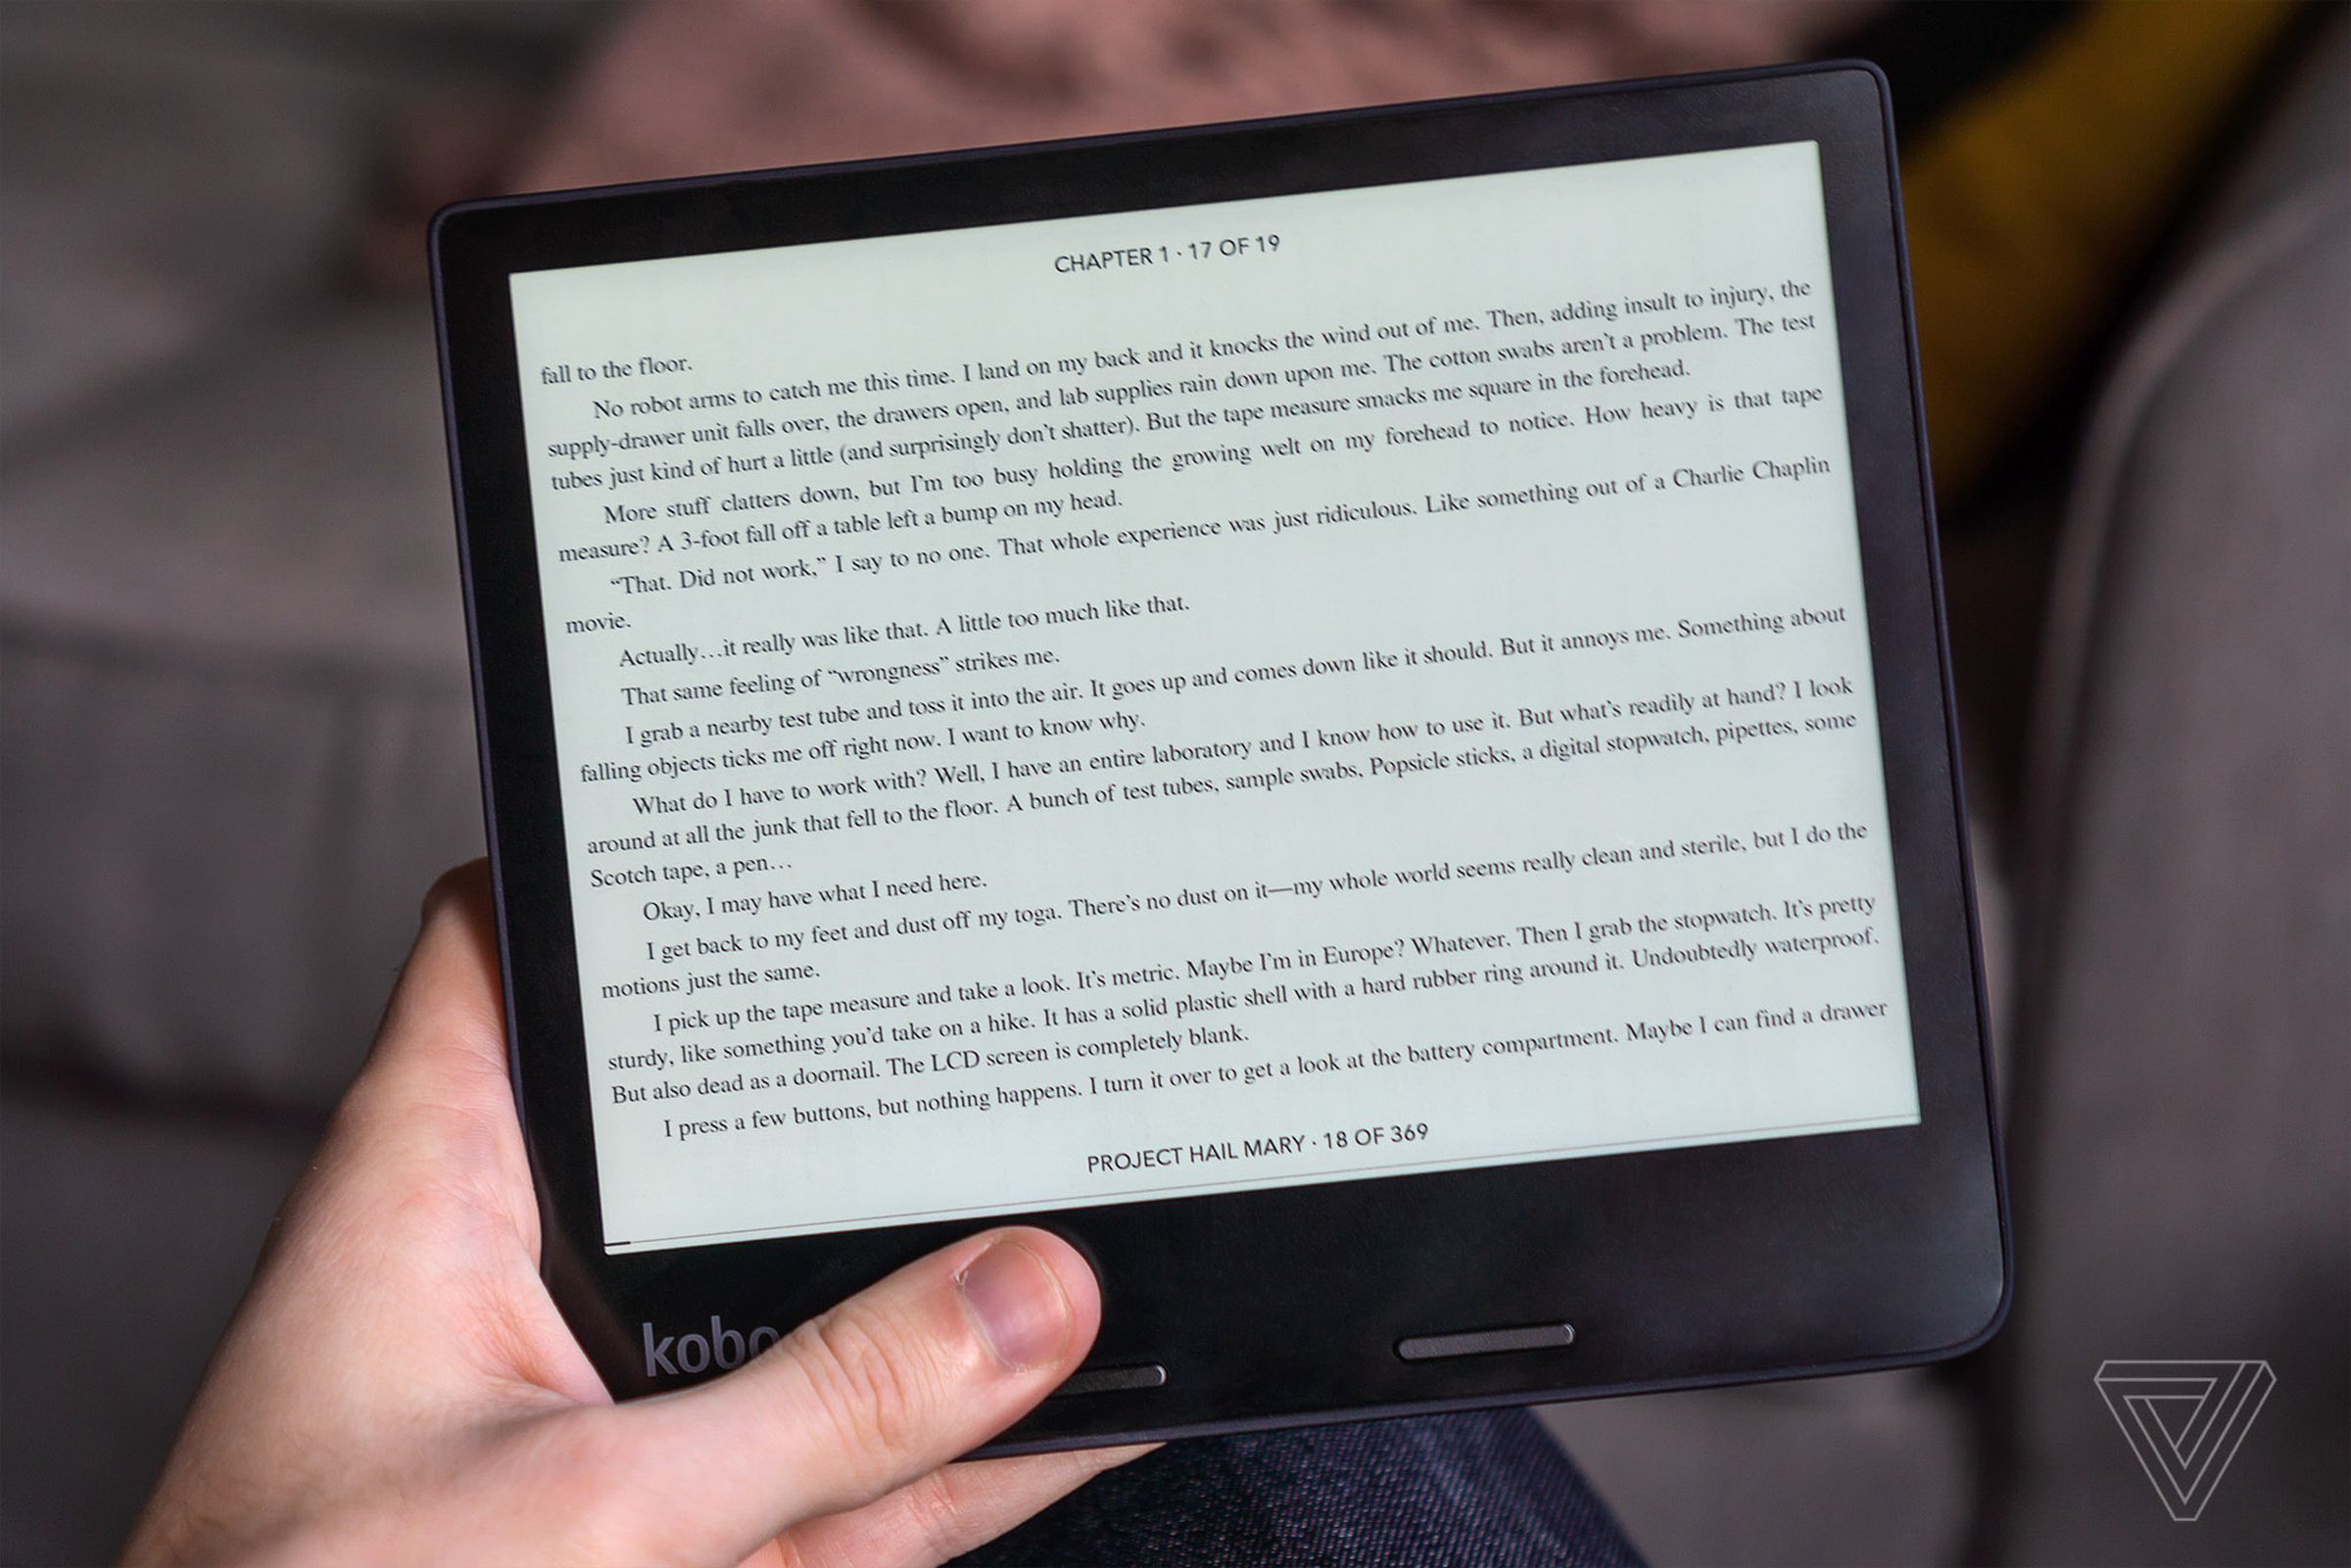 Picture of a hand holding a Kobo e-reader.